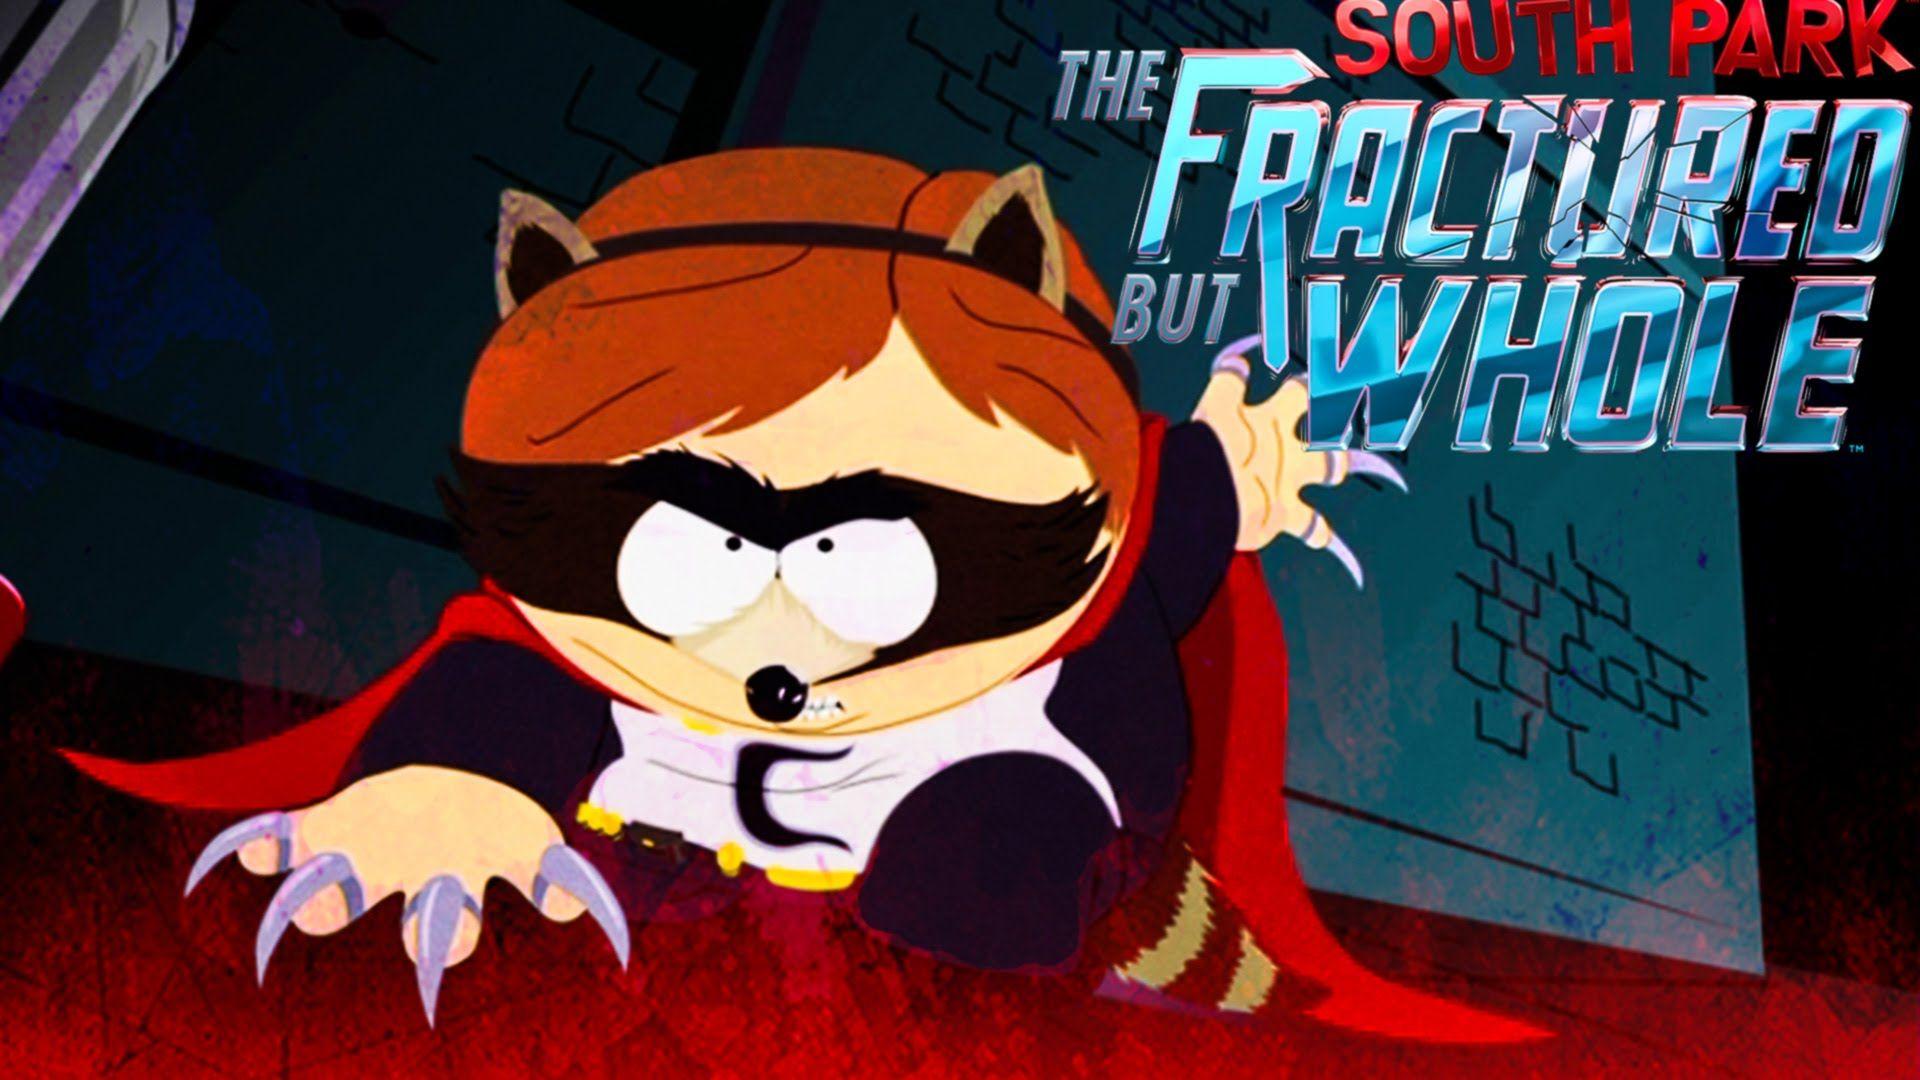 South Park: The Fractured But Whole HD Wallpaper 9 X 1080